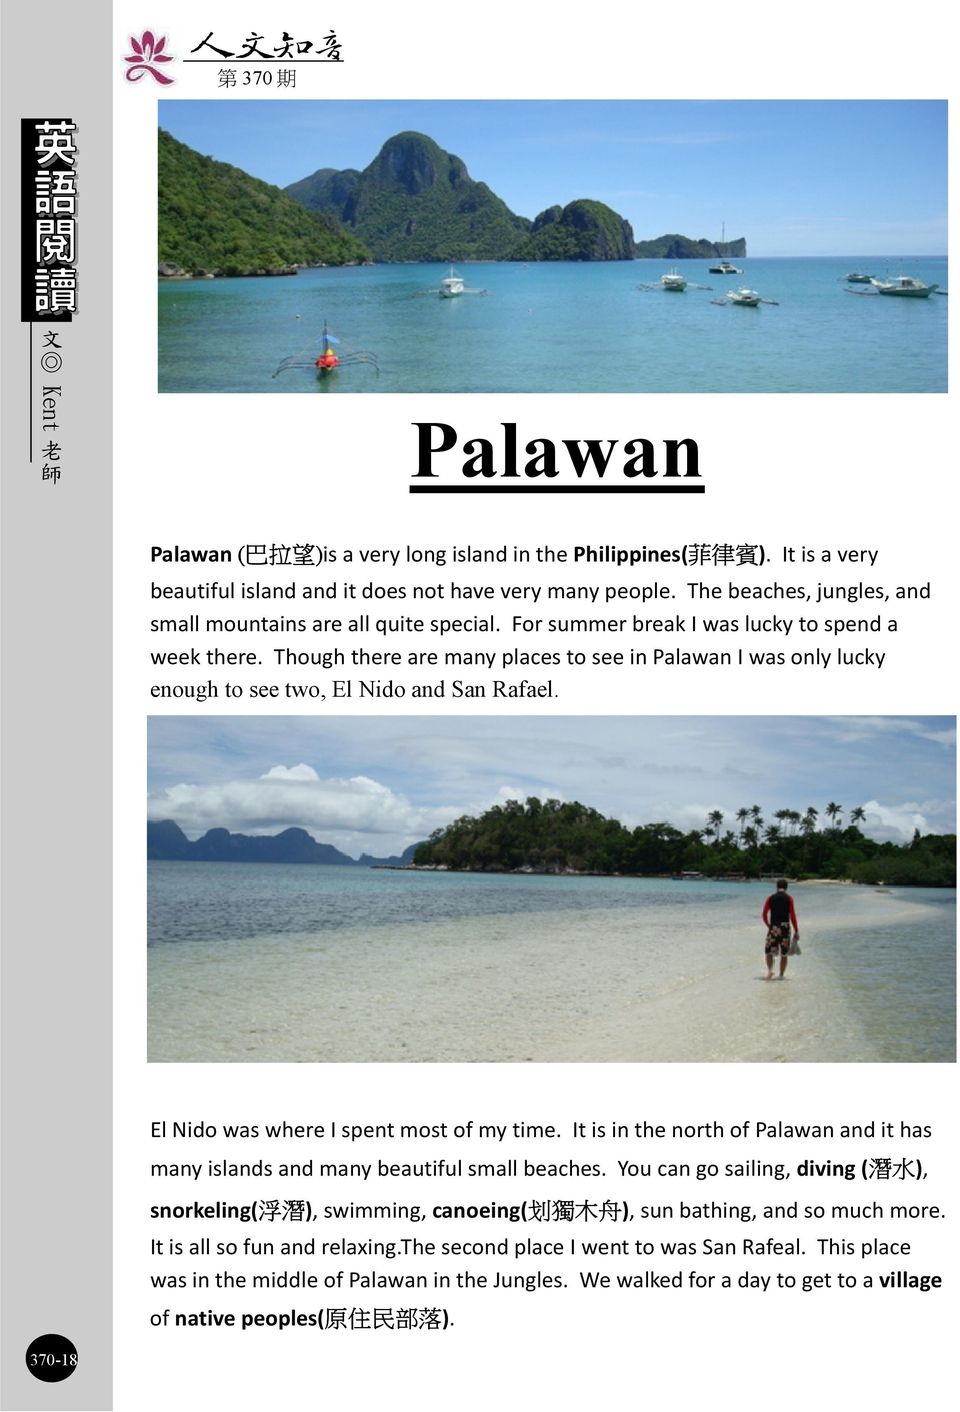 Though there are many places to see in Palawan I was only lucky enough to see two, El Nido and San Rafael. El Nido was where I spent most of my time.